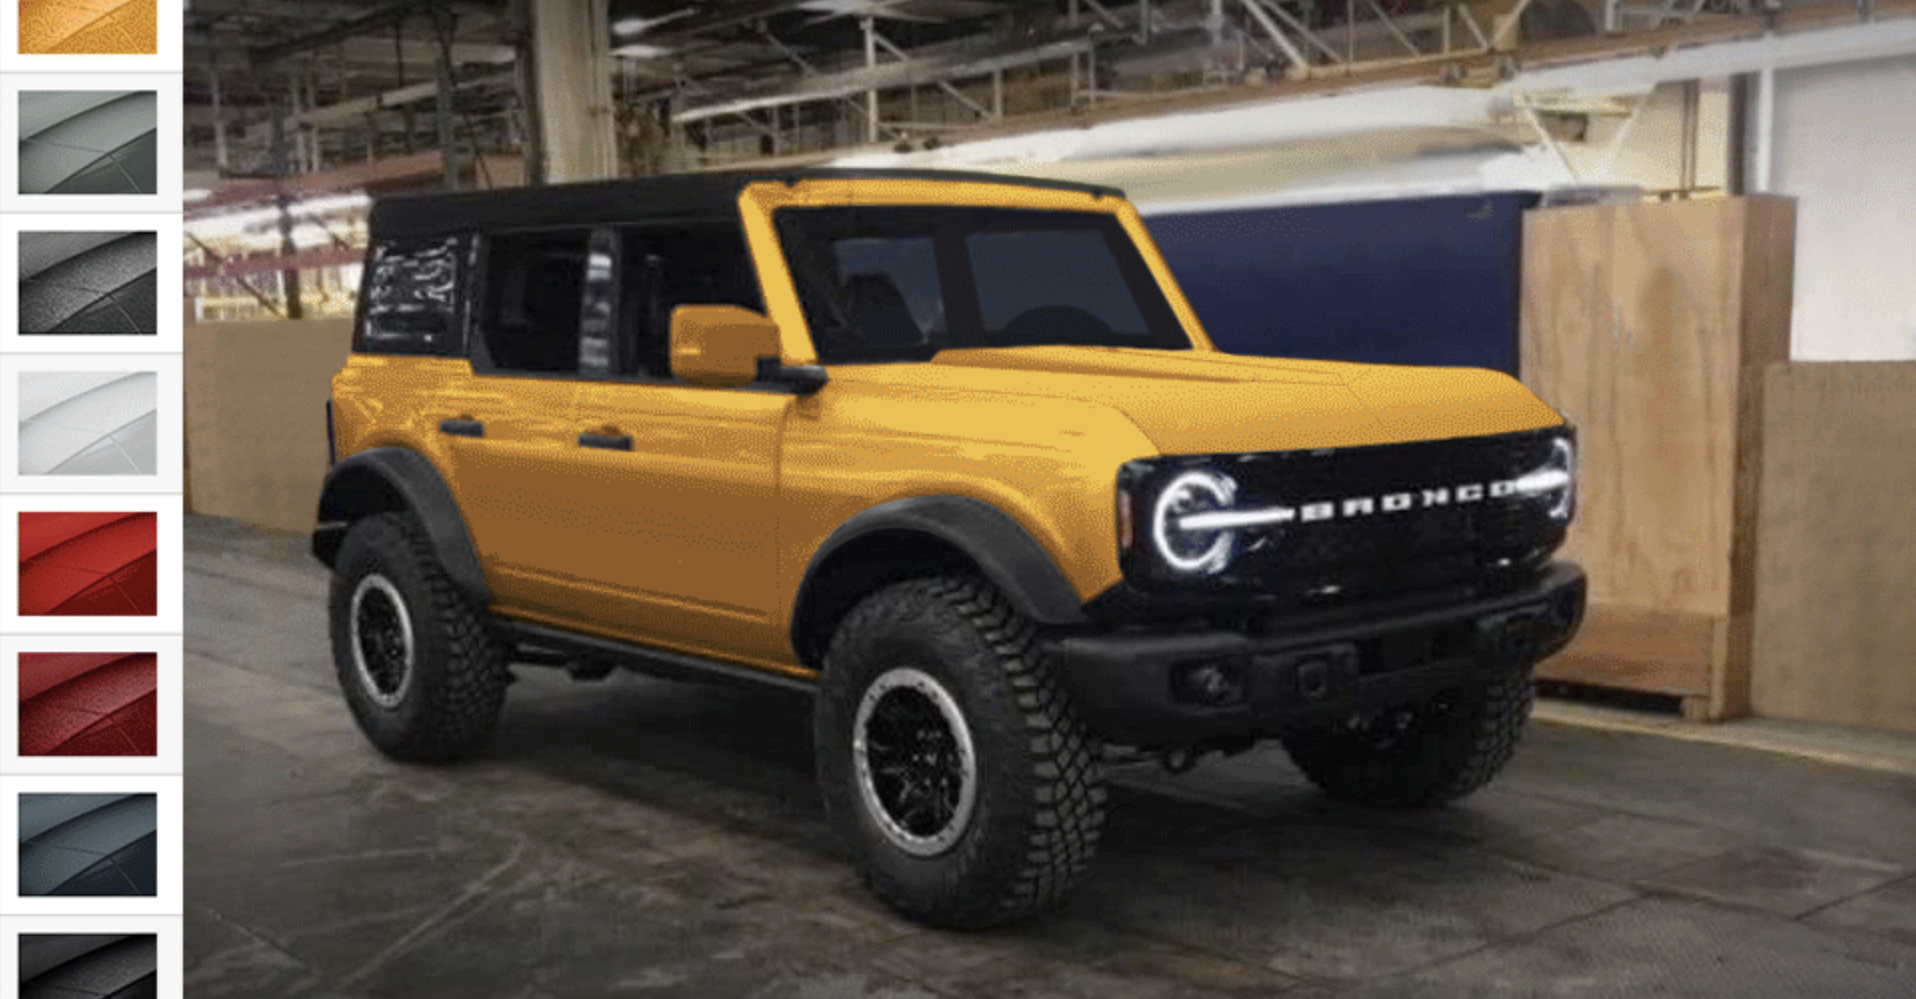 Bronco 4 Door Rendered In 2021 Colors Animated 2021 Ford